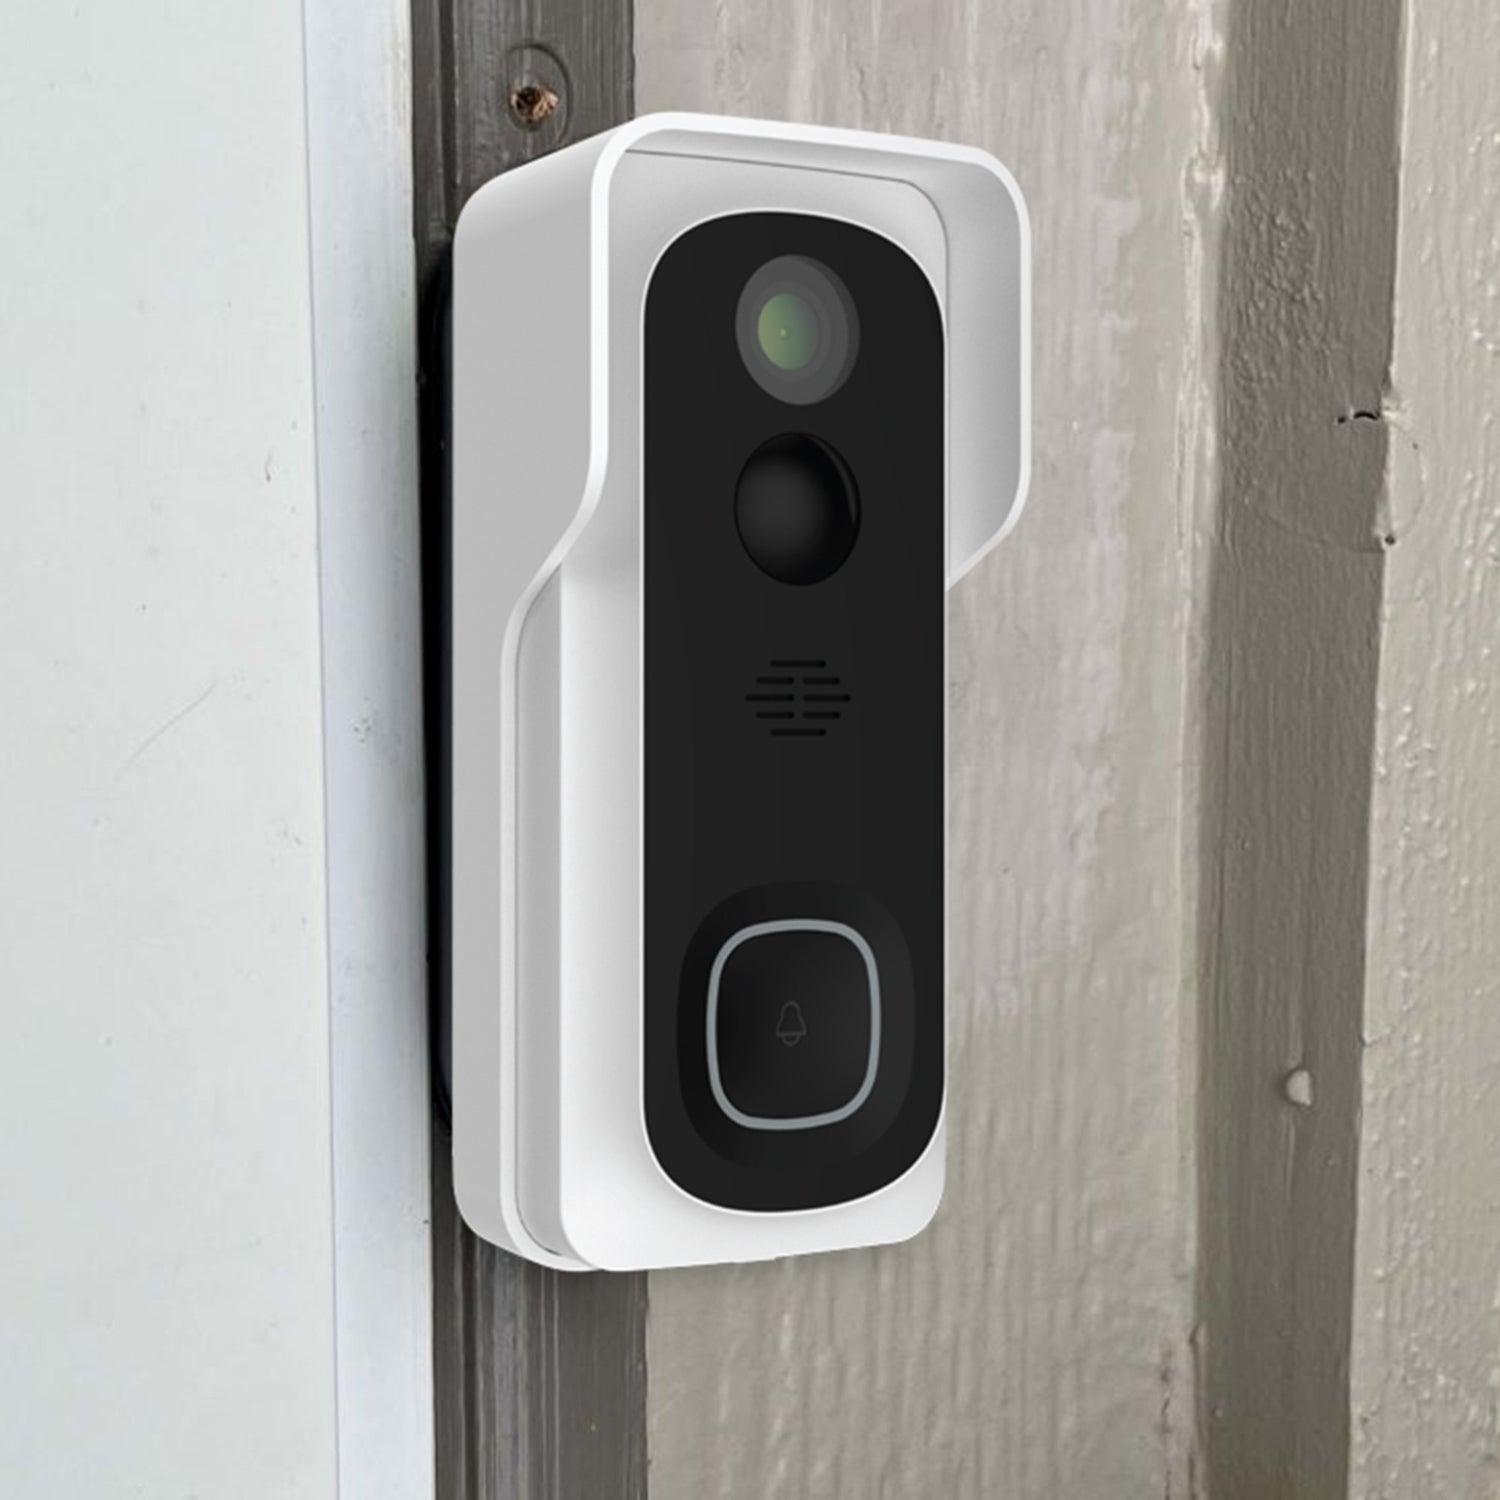 Wired or Battery-Powered Smart Wi-Fi Video Doorbell Camera with Motion Detection and Two-Way Audio